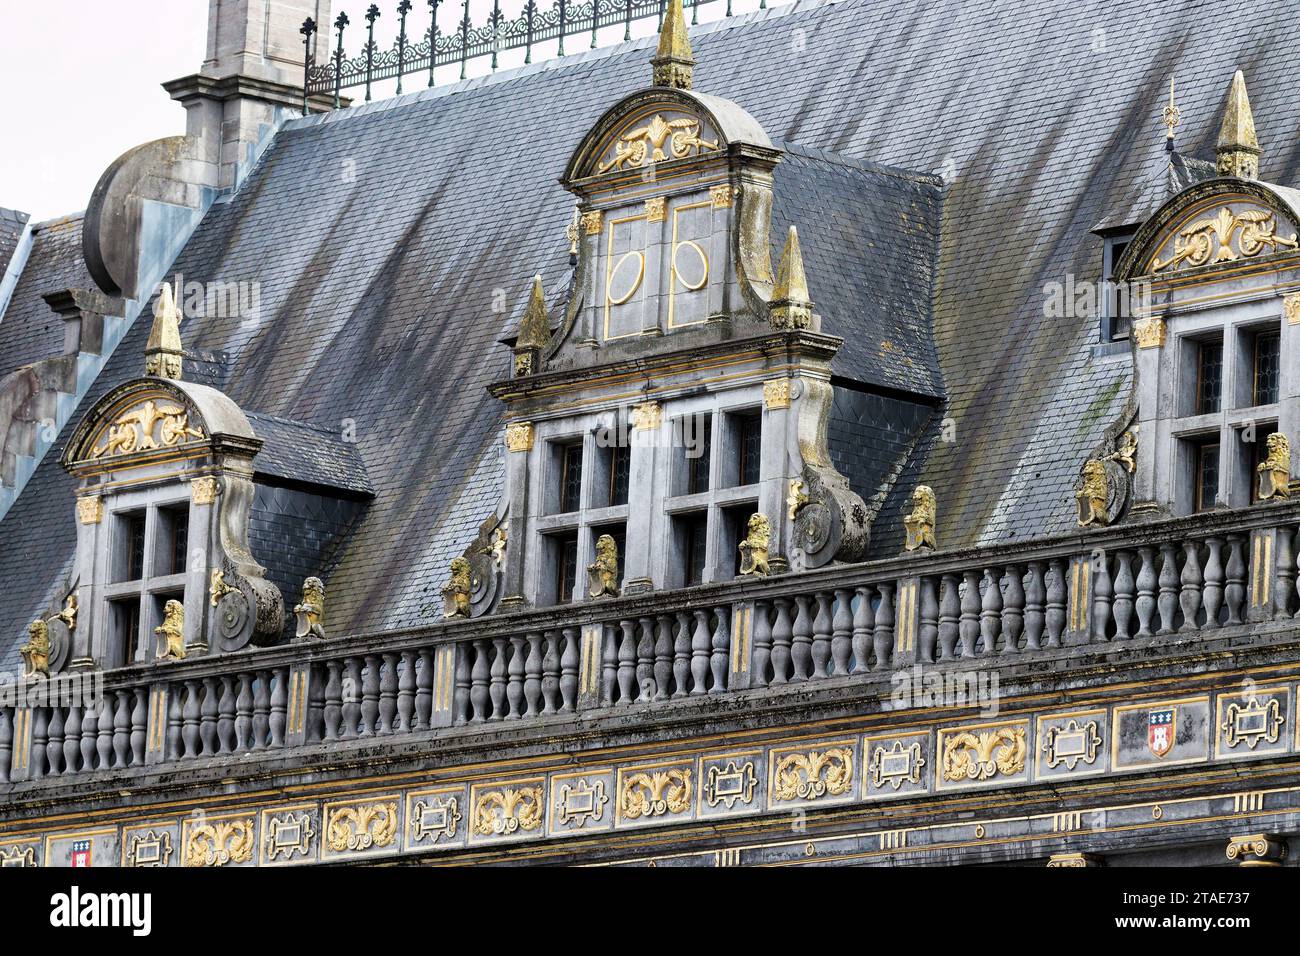 Belgium, Wallonia, Province of Hainaut, Tournai, Grand Place, details of the Cloth Hall and Conciergerie Stock Photo